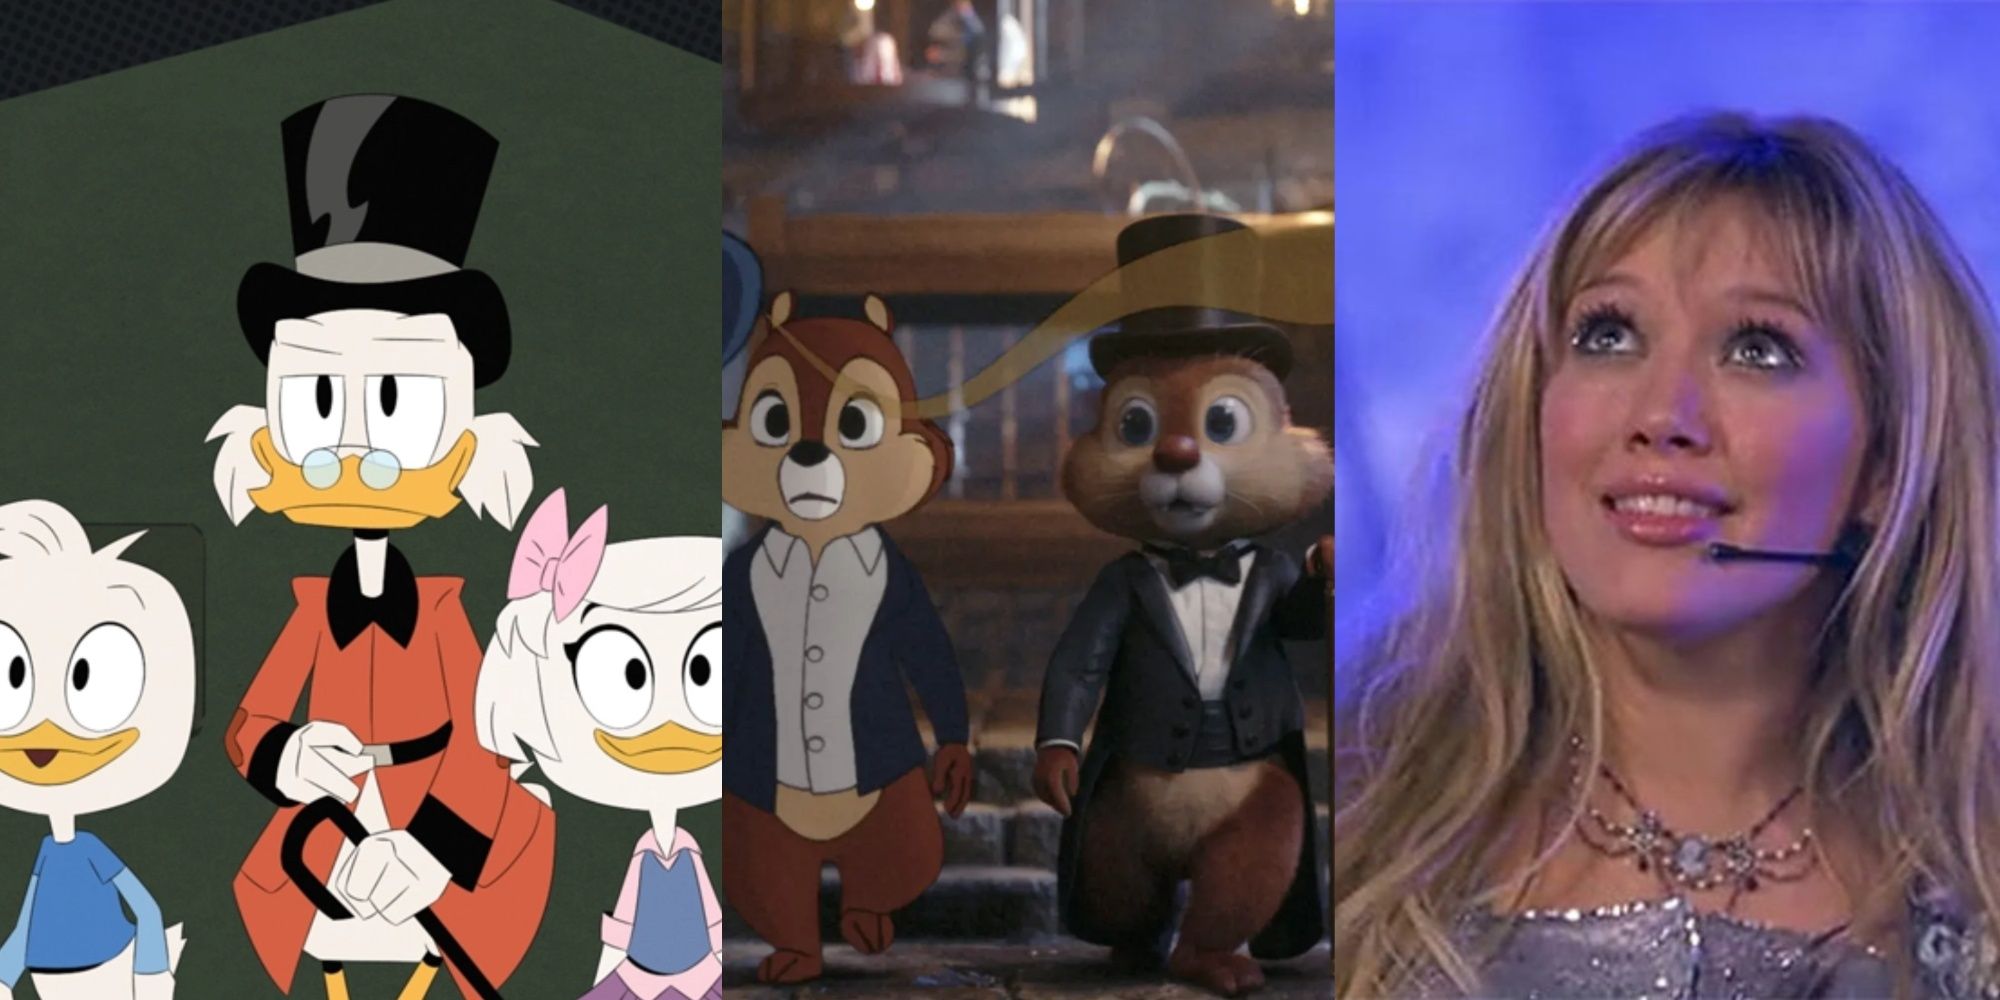 Split Image of Scrooge McDuck and two ducklings, Chip and Dale, and Lizzie McGuire